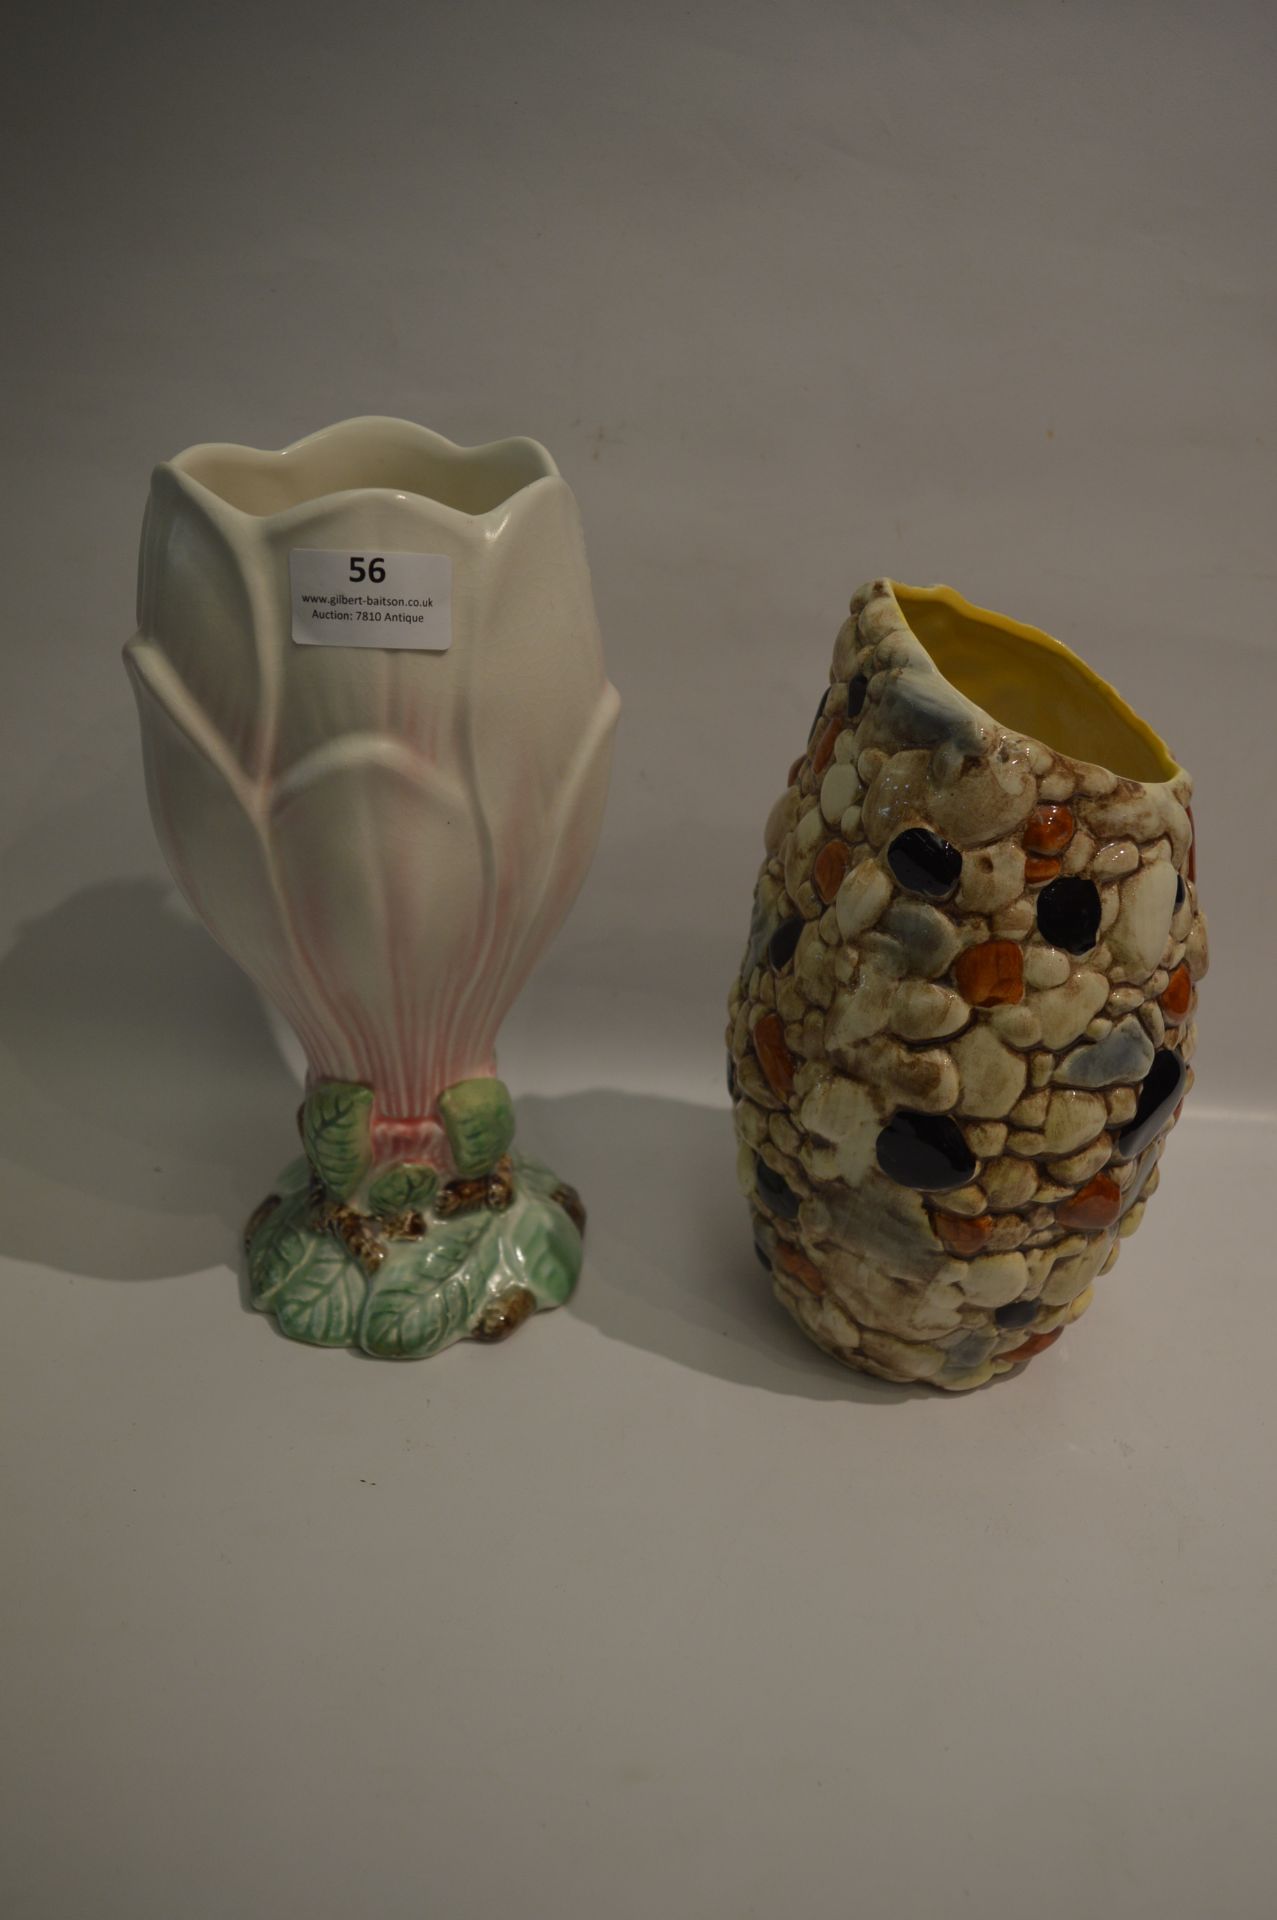 Two Sylvac Pottery Vase Flower and Pebbles